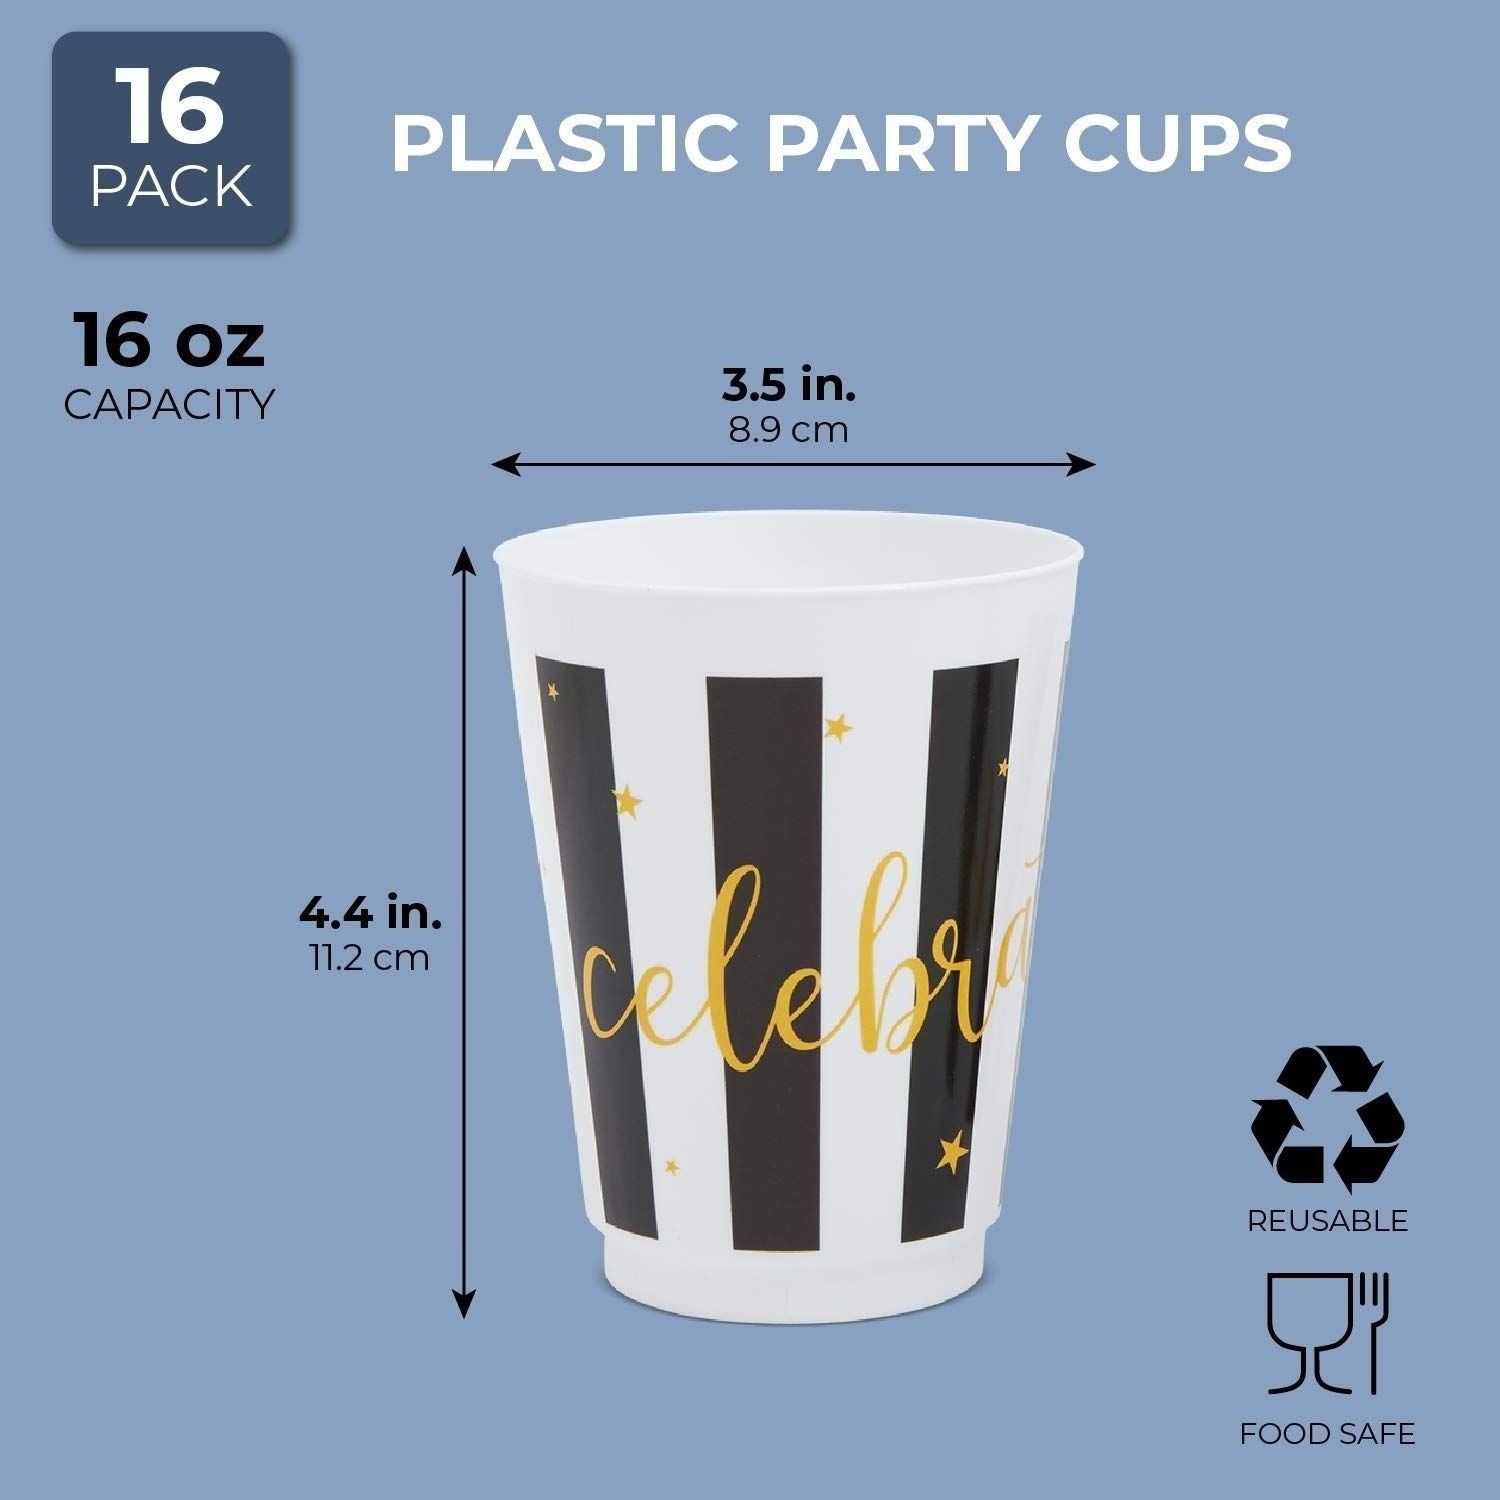 16x Plastic 16 oz Party Cups Celebrate Reusable Tumblers for Birthday Baby  Shower Graduation Wedding Parties, Black and White